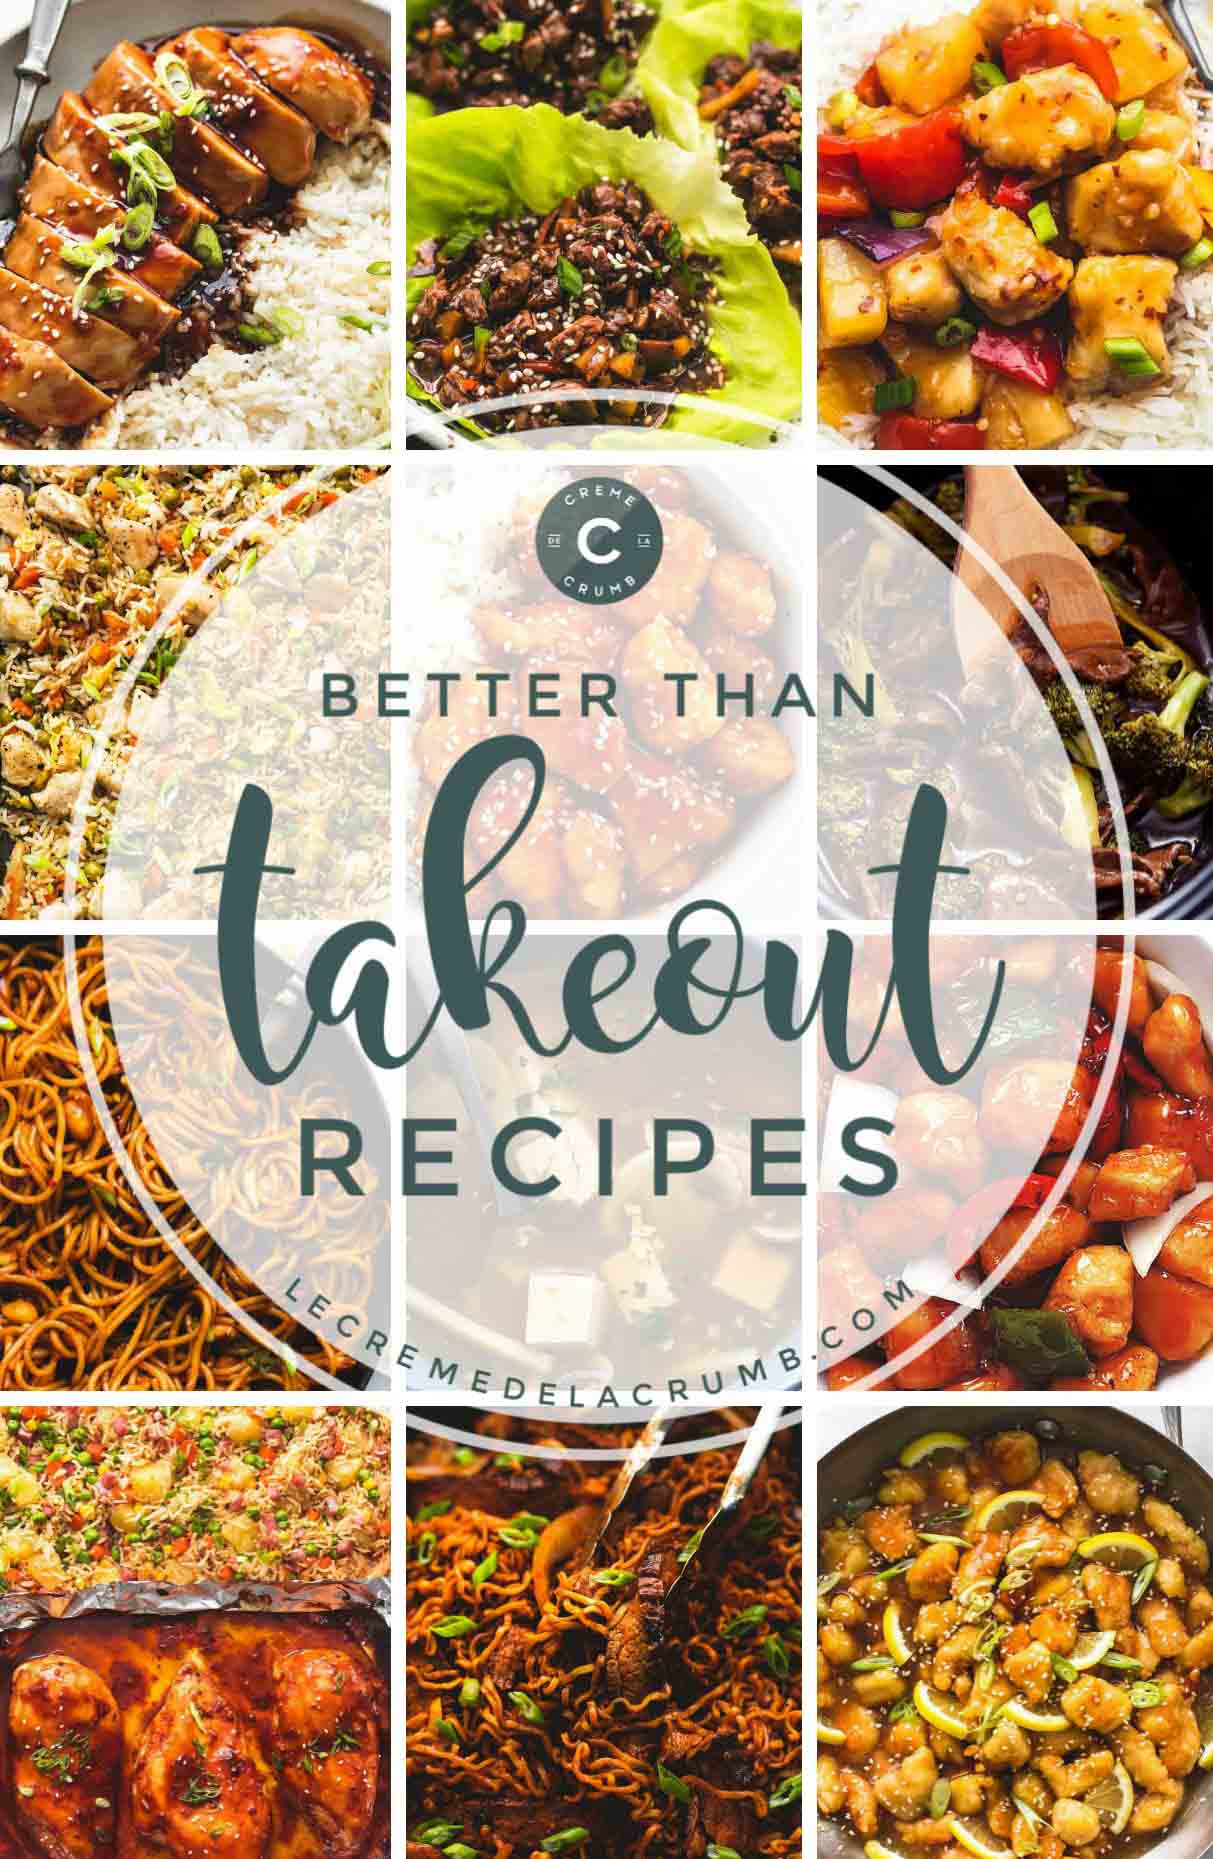 an image of the cover of the "Better Than Takeout Recipes" cookbook.